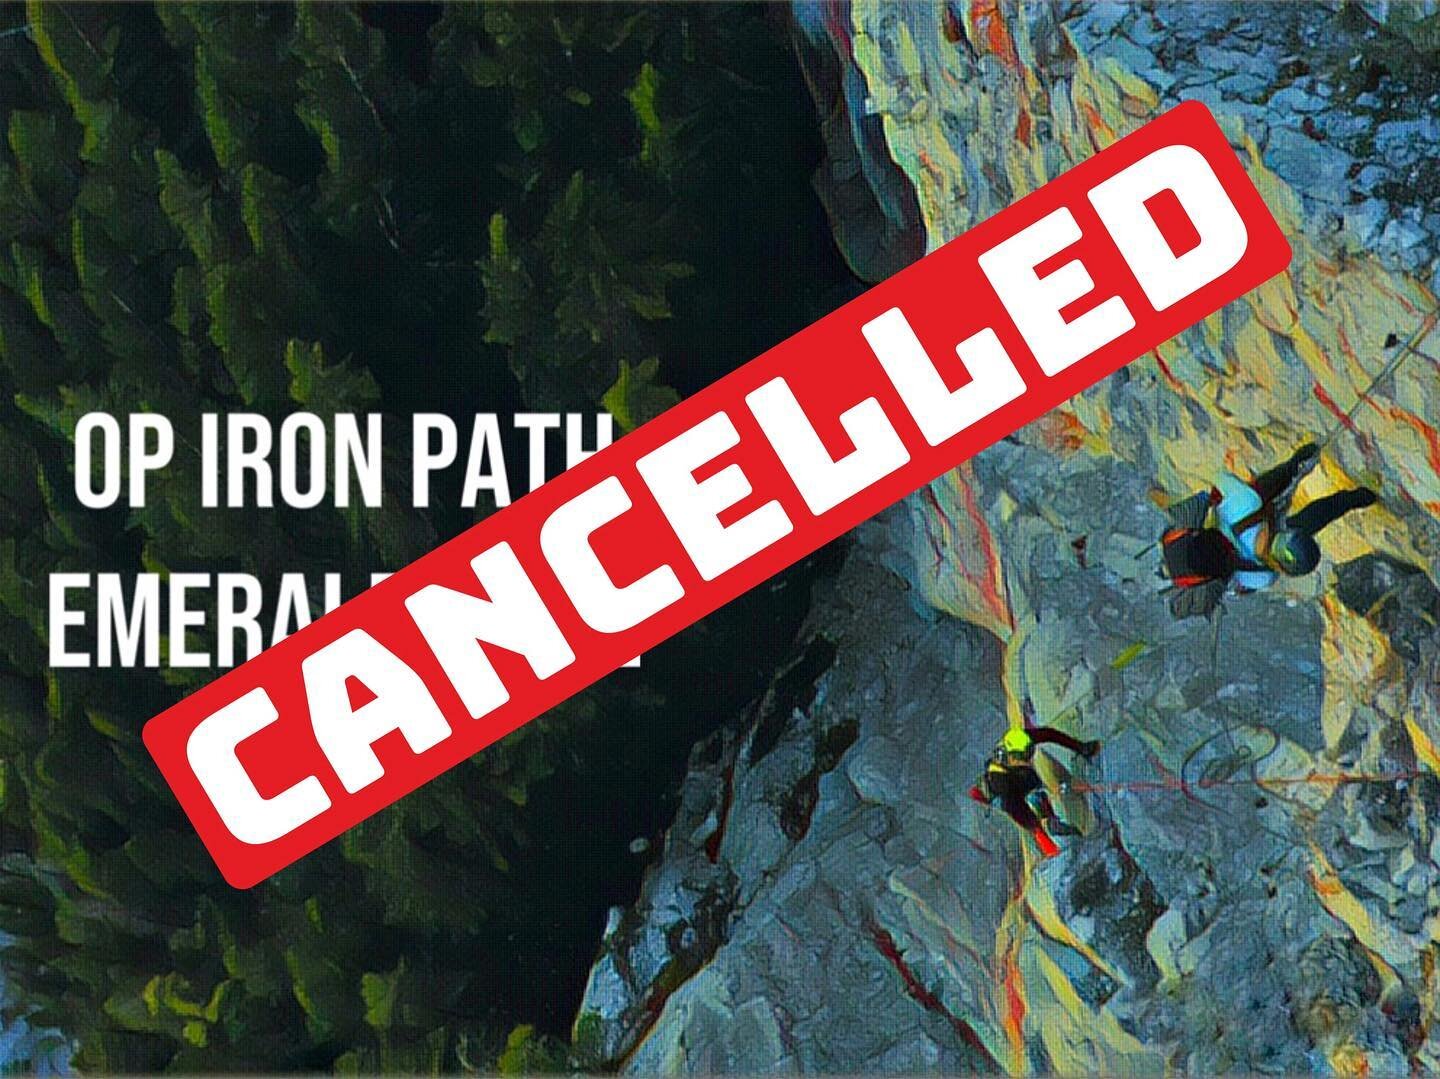 UPDATE:  OP IRON PATH - CANCELLED

Unfortunately due to some planning issues this event has been canceled.